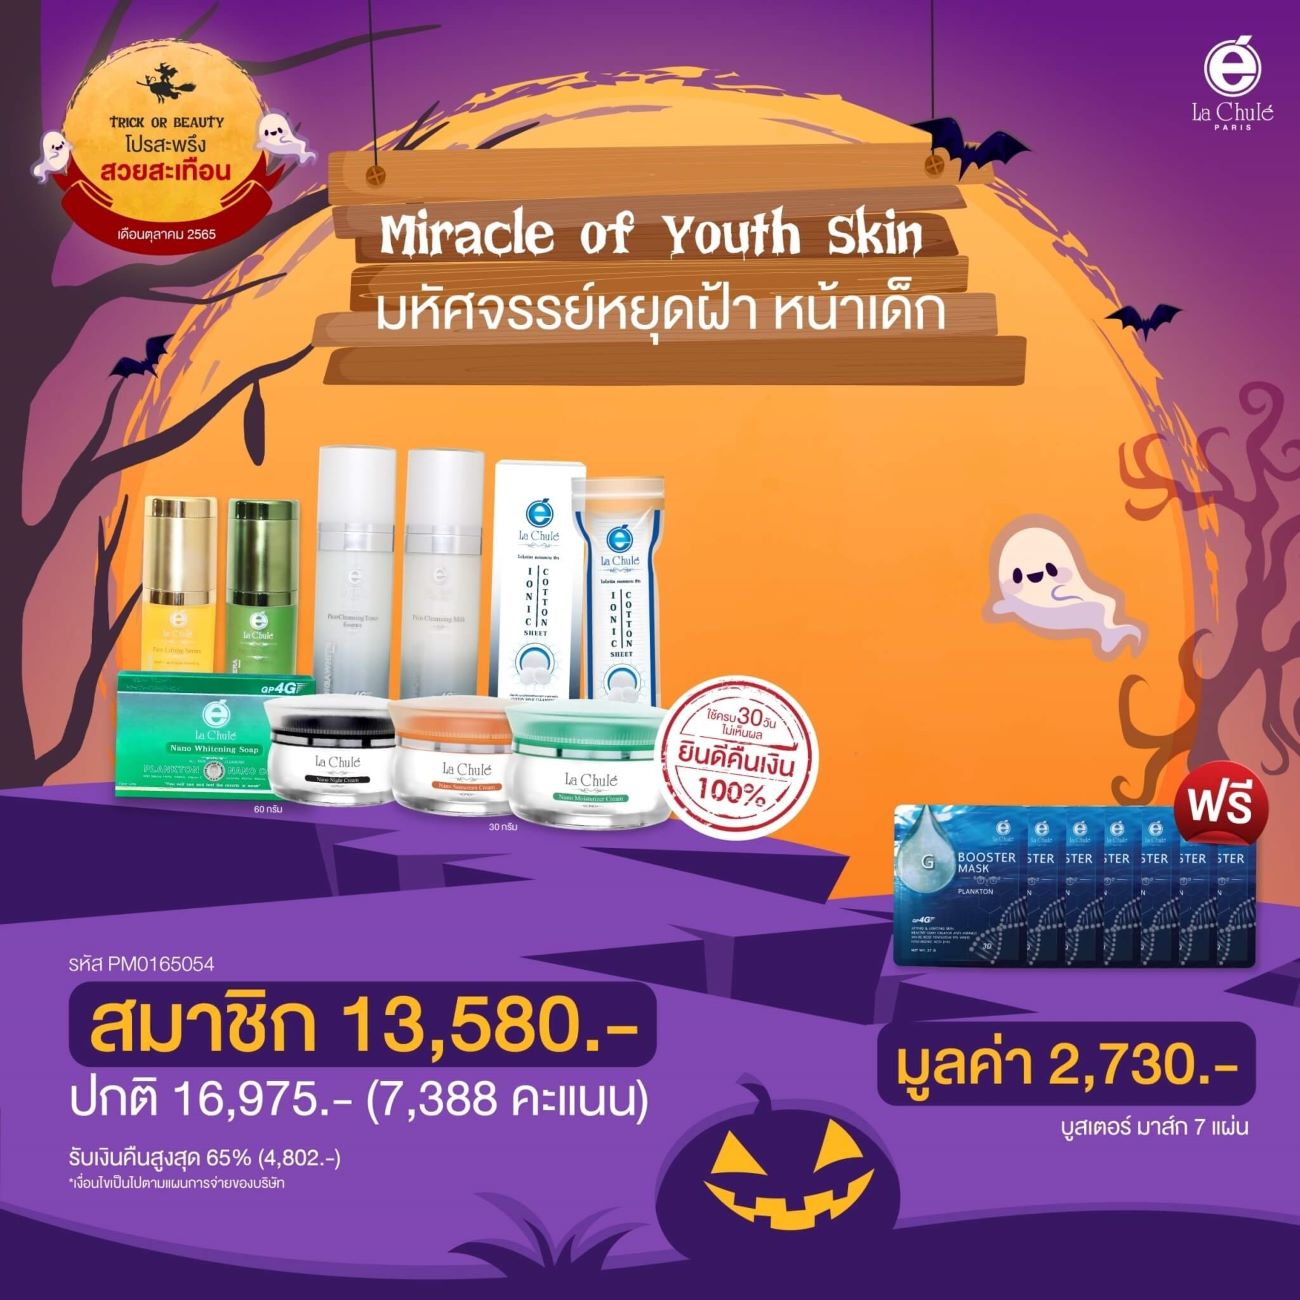 Miracle of Youth Skin  